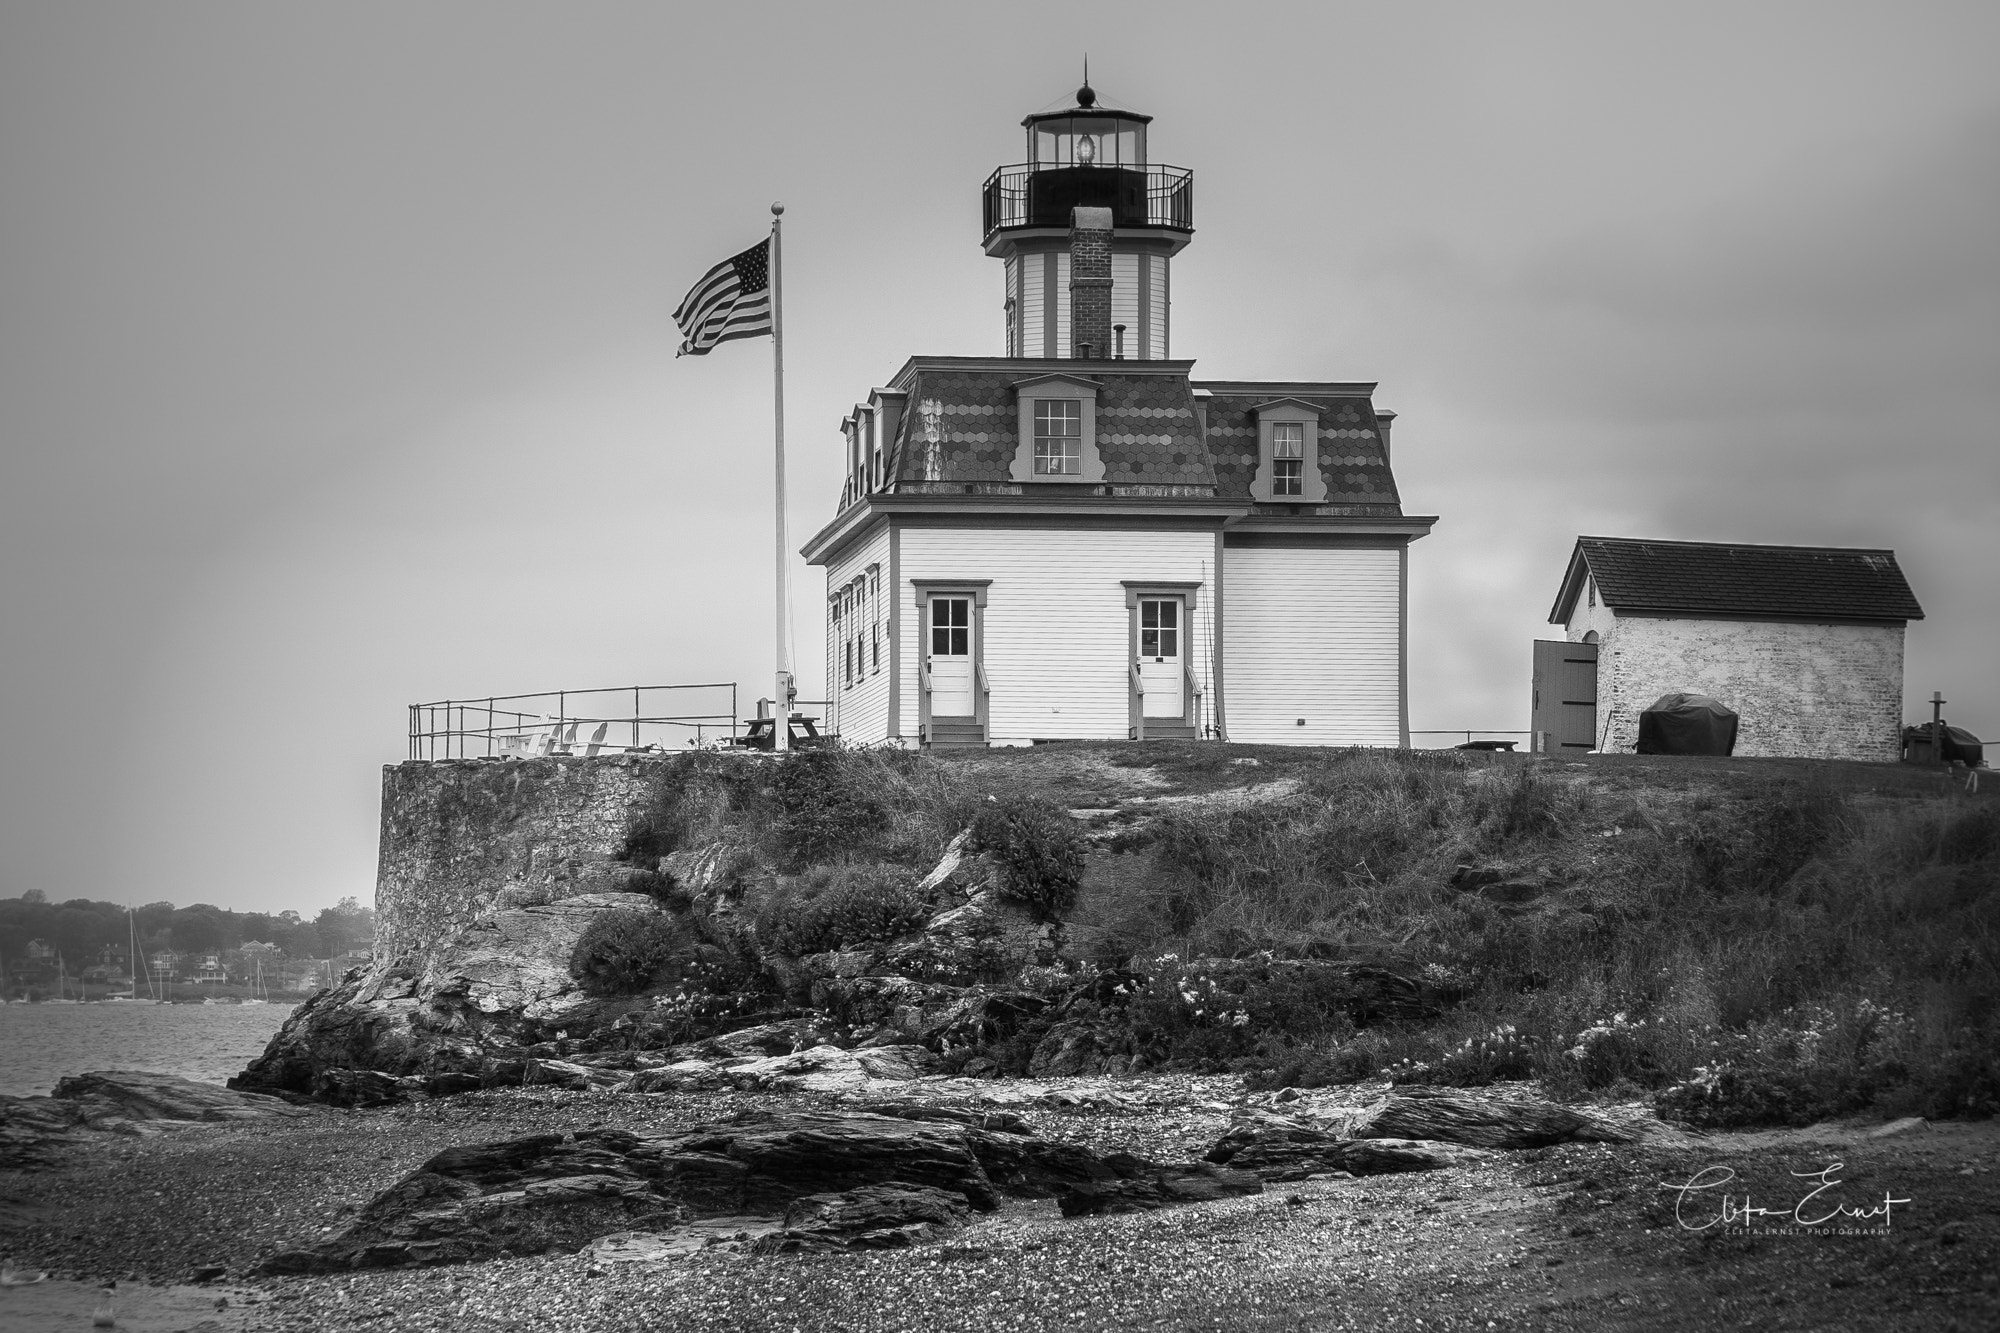 Sony a7 II sample photo. Rose island lighthouse in b&w photography